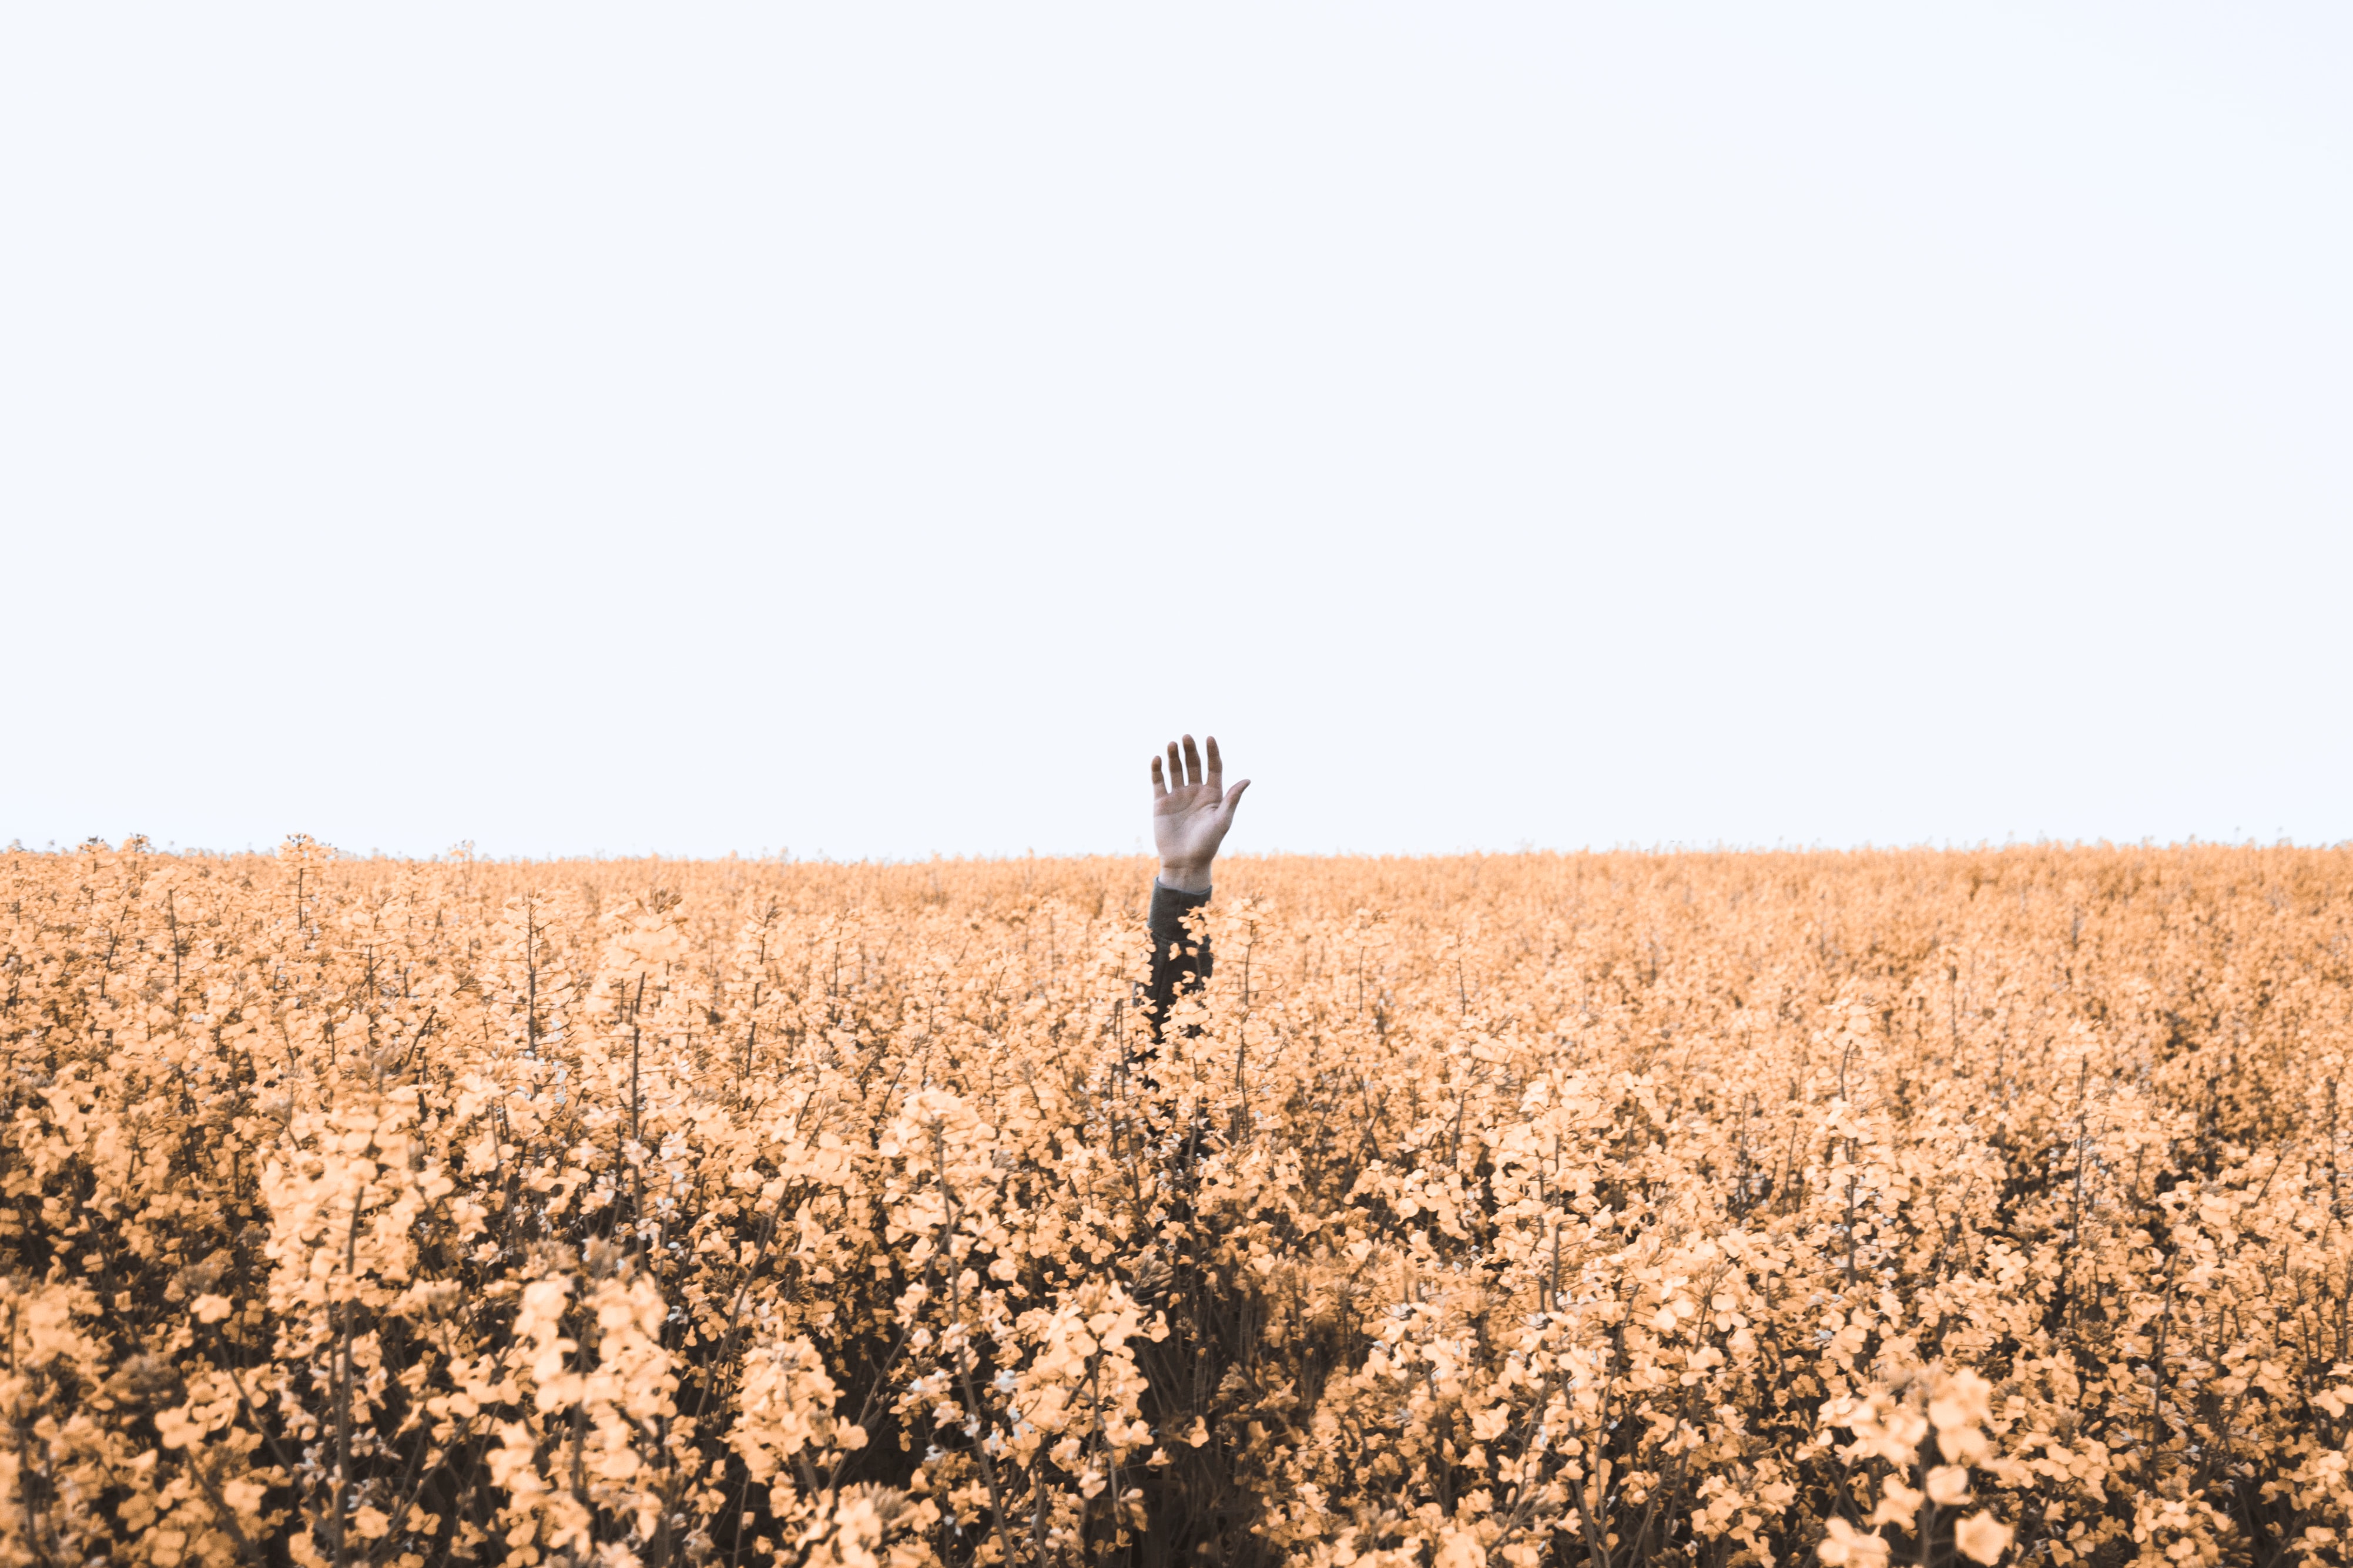 A single hand is raised in a crop field - indicating put you're hand up for help.